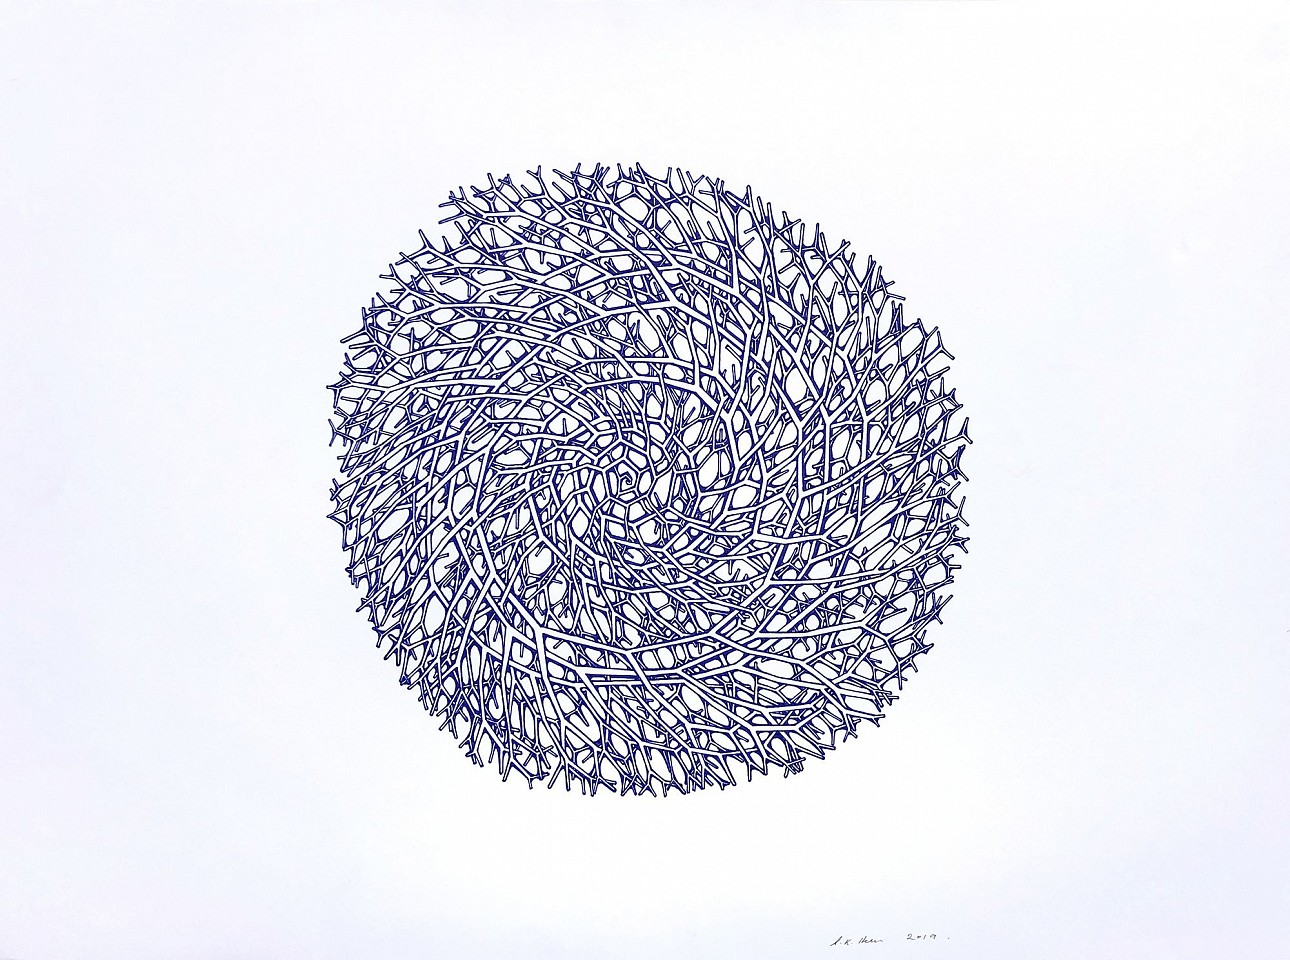 Stewart Helm, Stick Blue Cells, 2019
colored inks on paper, 19.75" x 27.5"
SH-622
Price Upon Request